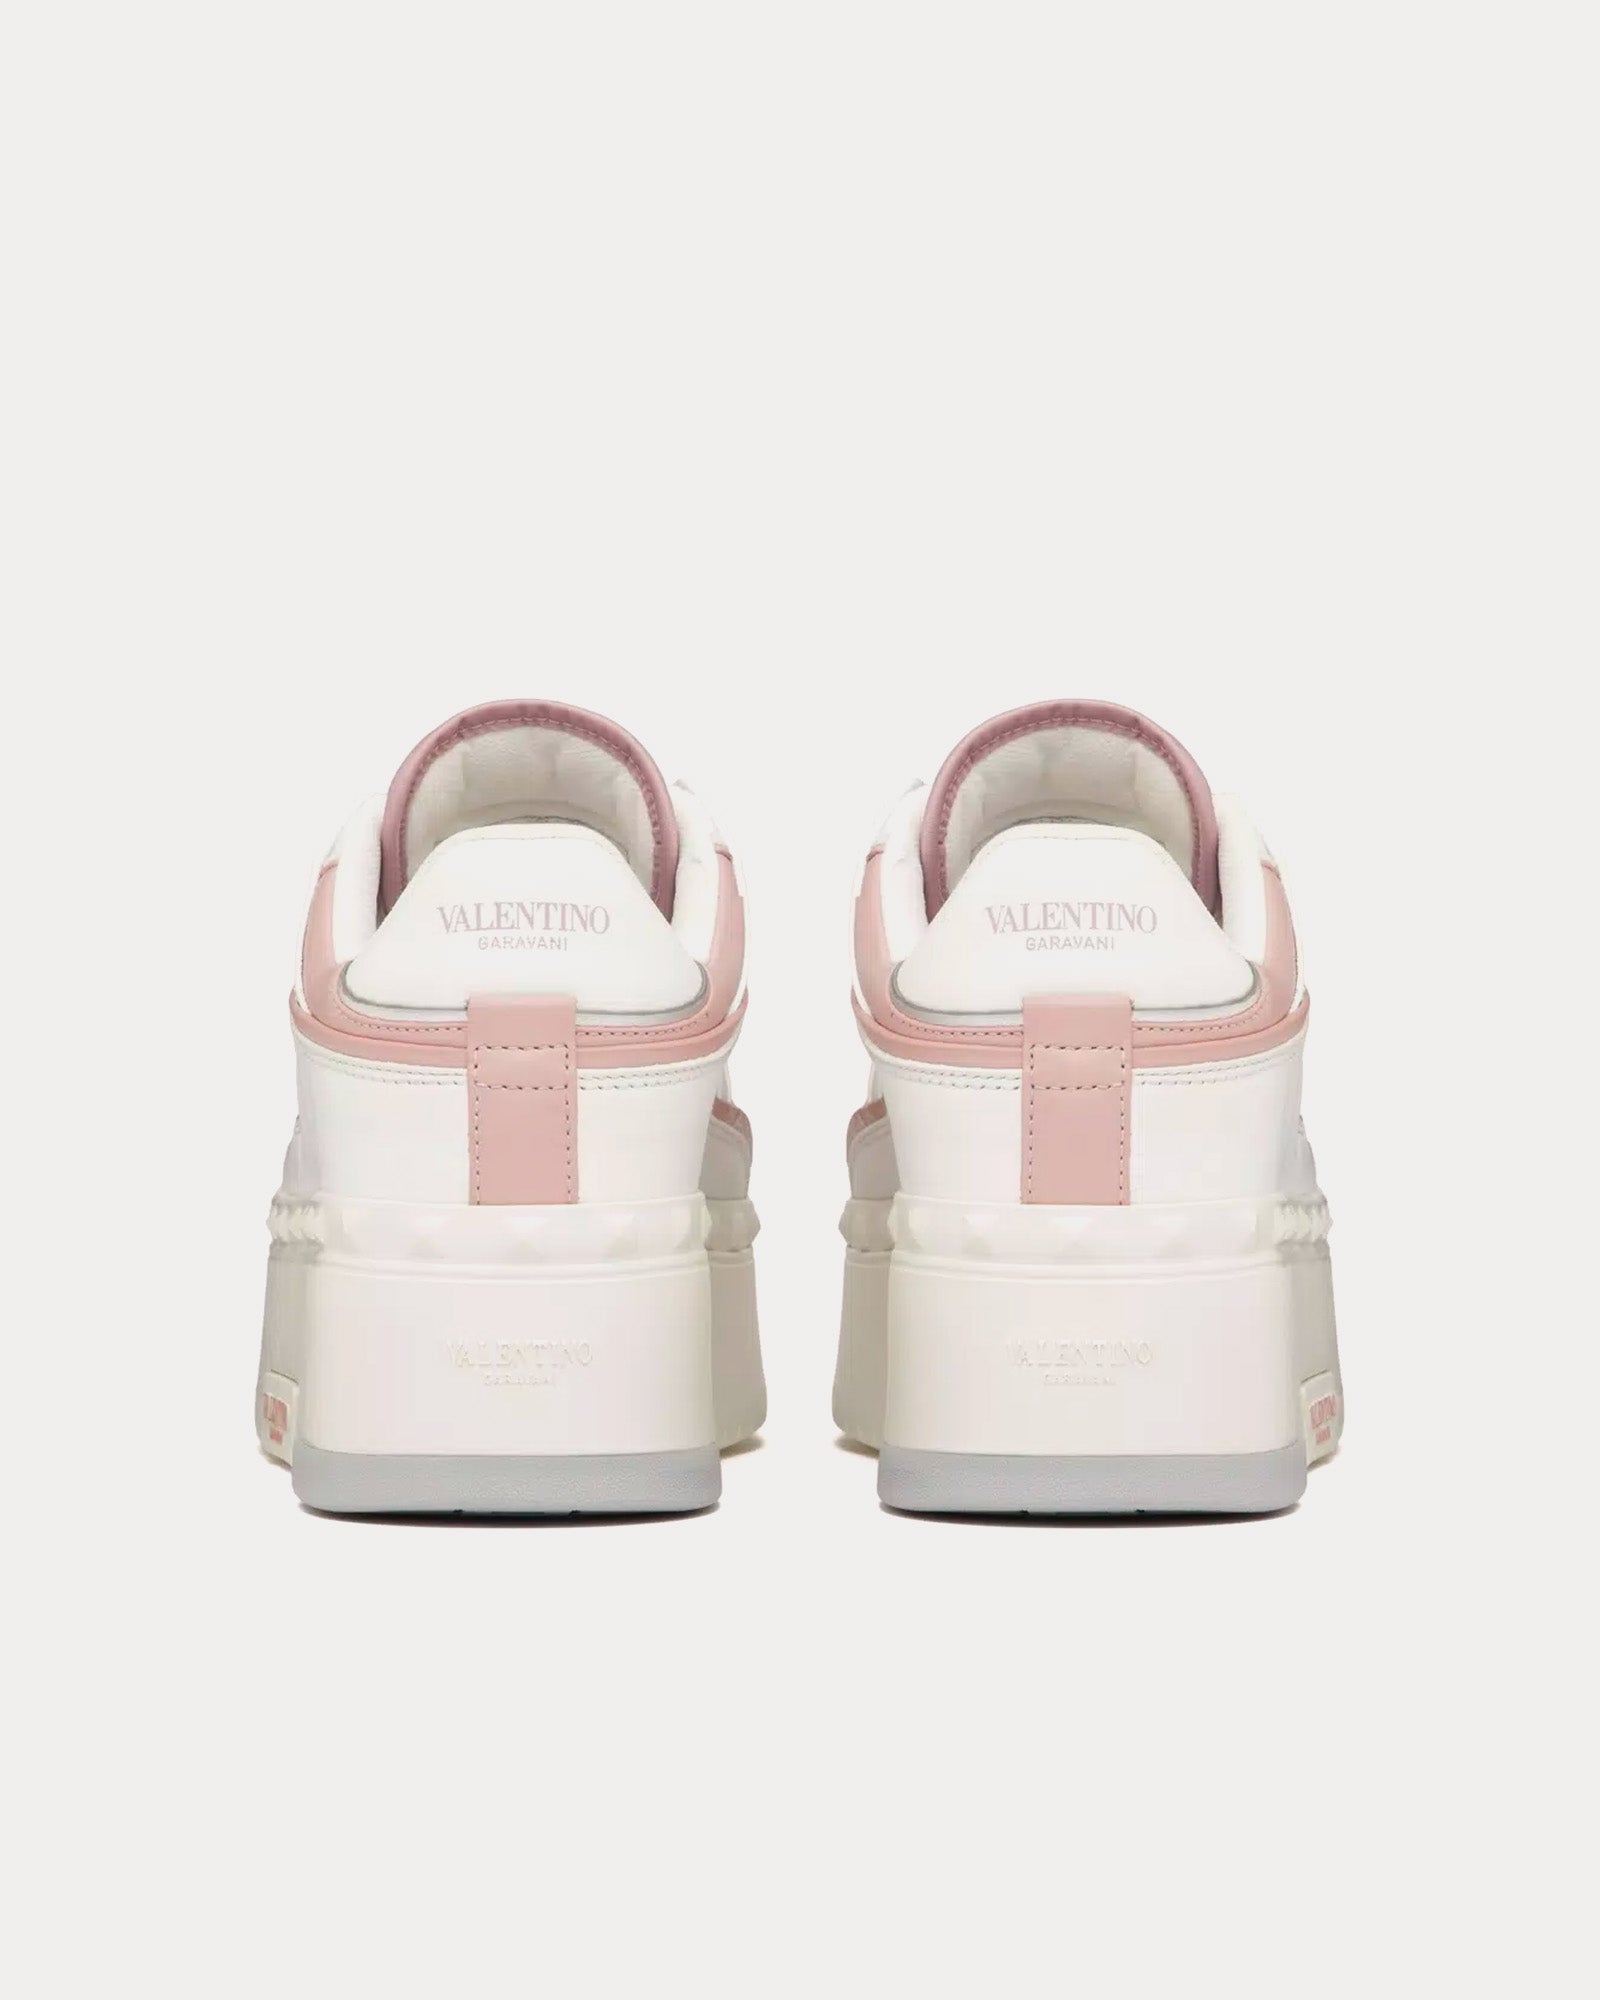 Valentino - Freedots XL Calfskin Leather White / Rose / Silver Low Top Sneakers